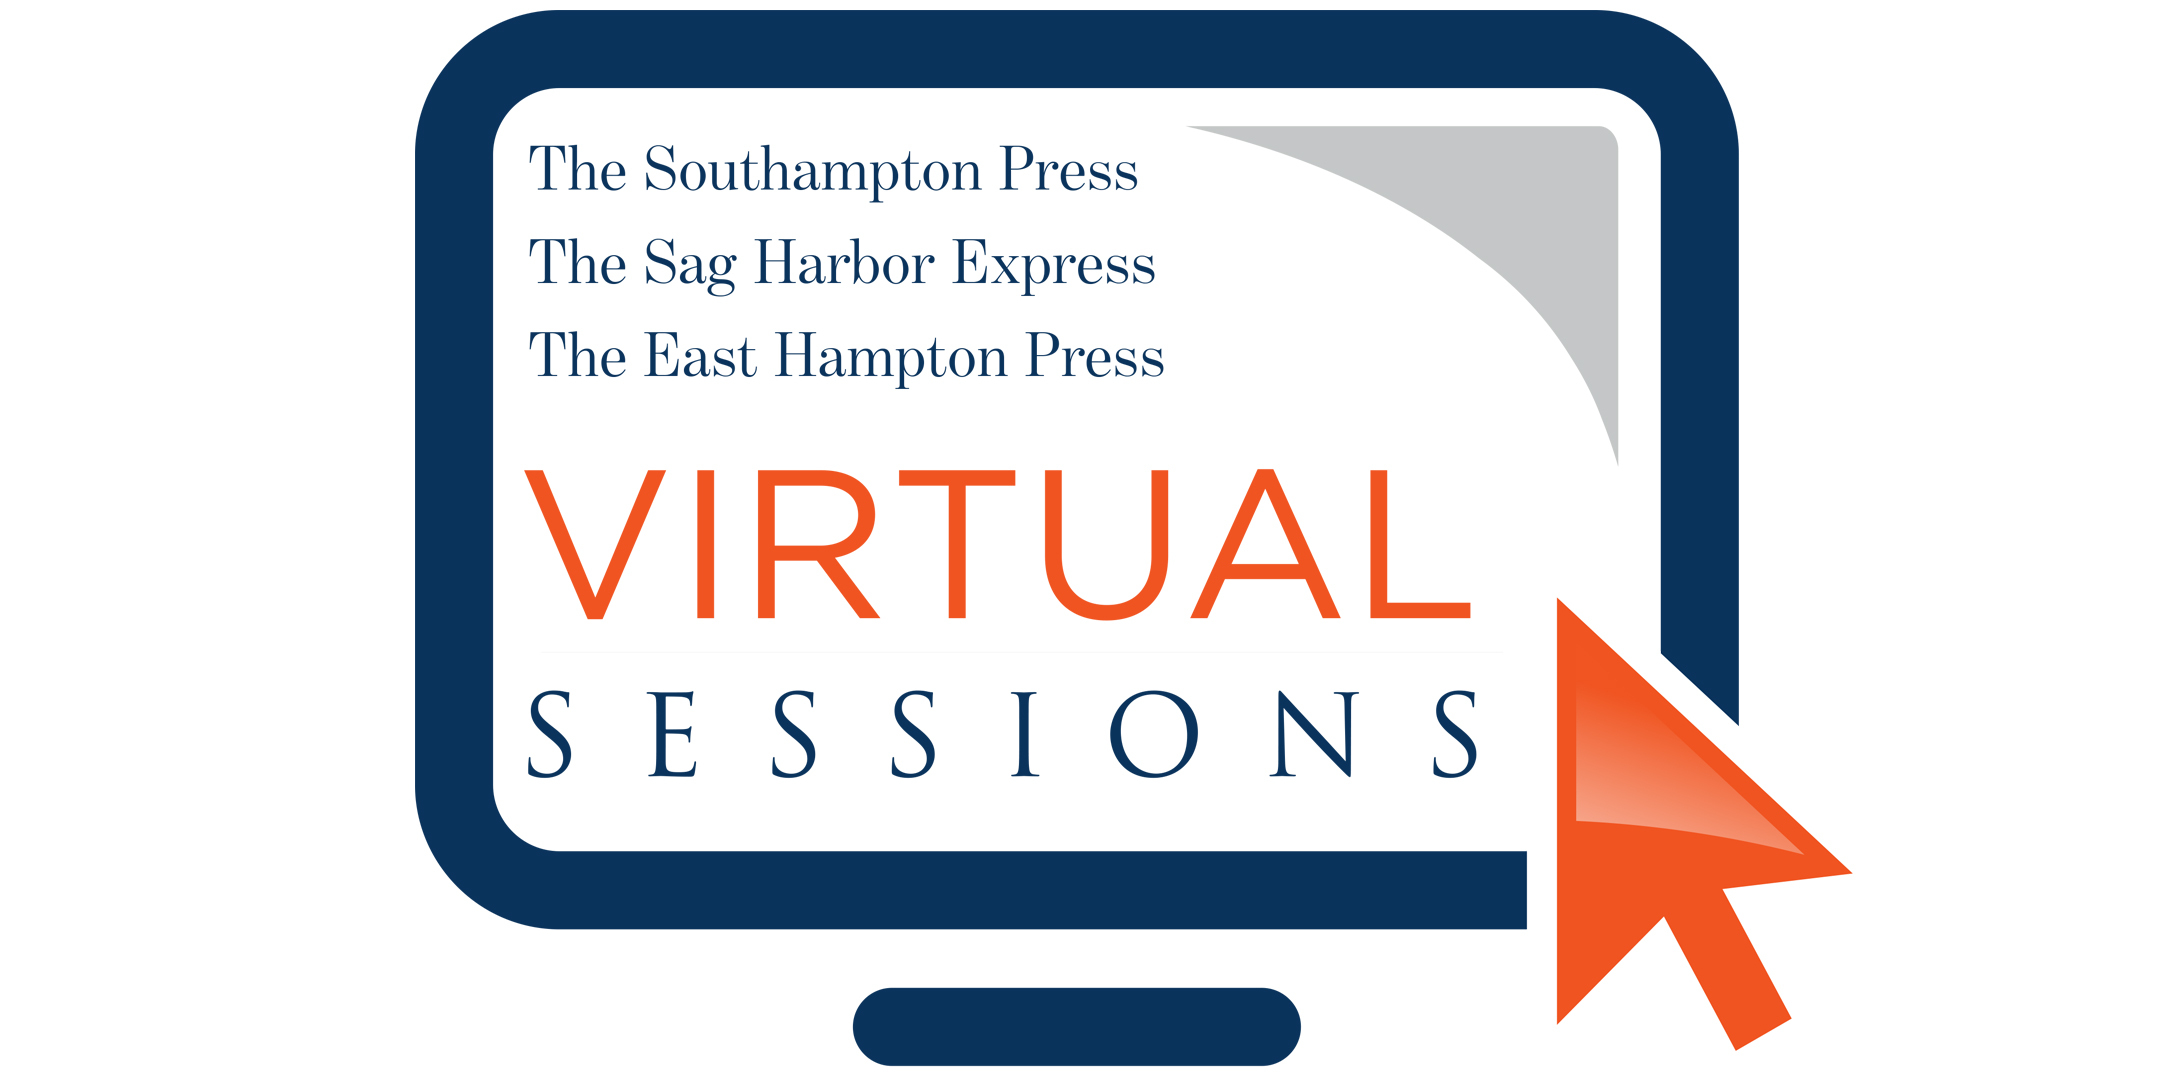 The first Virtual Sessions event will be Thursday, May 7, at 2 p.m.